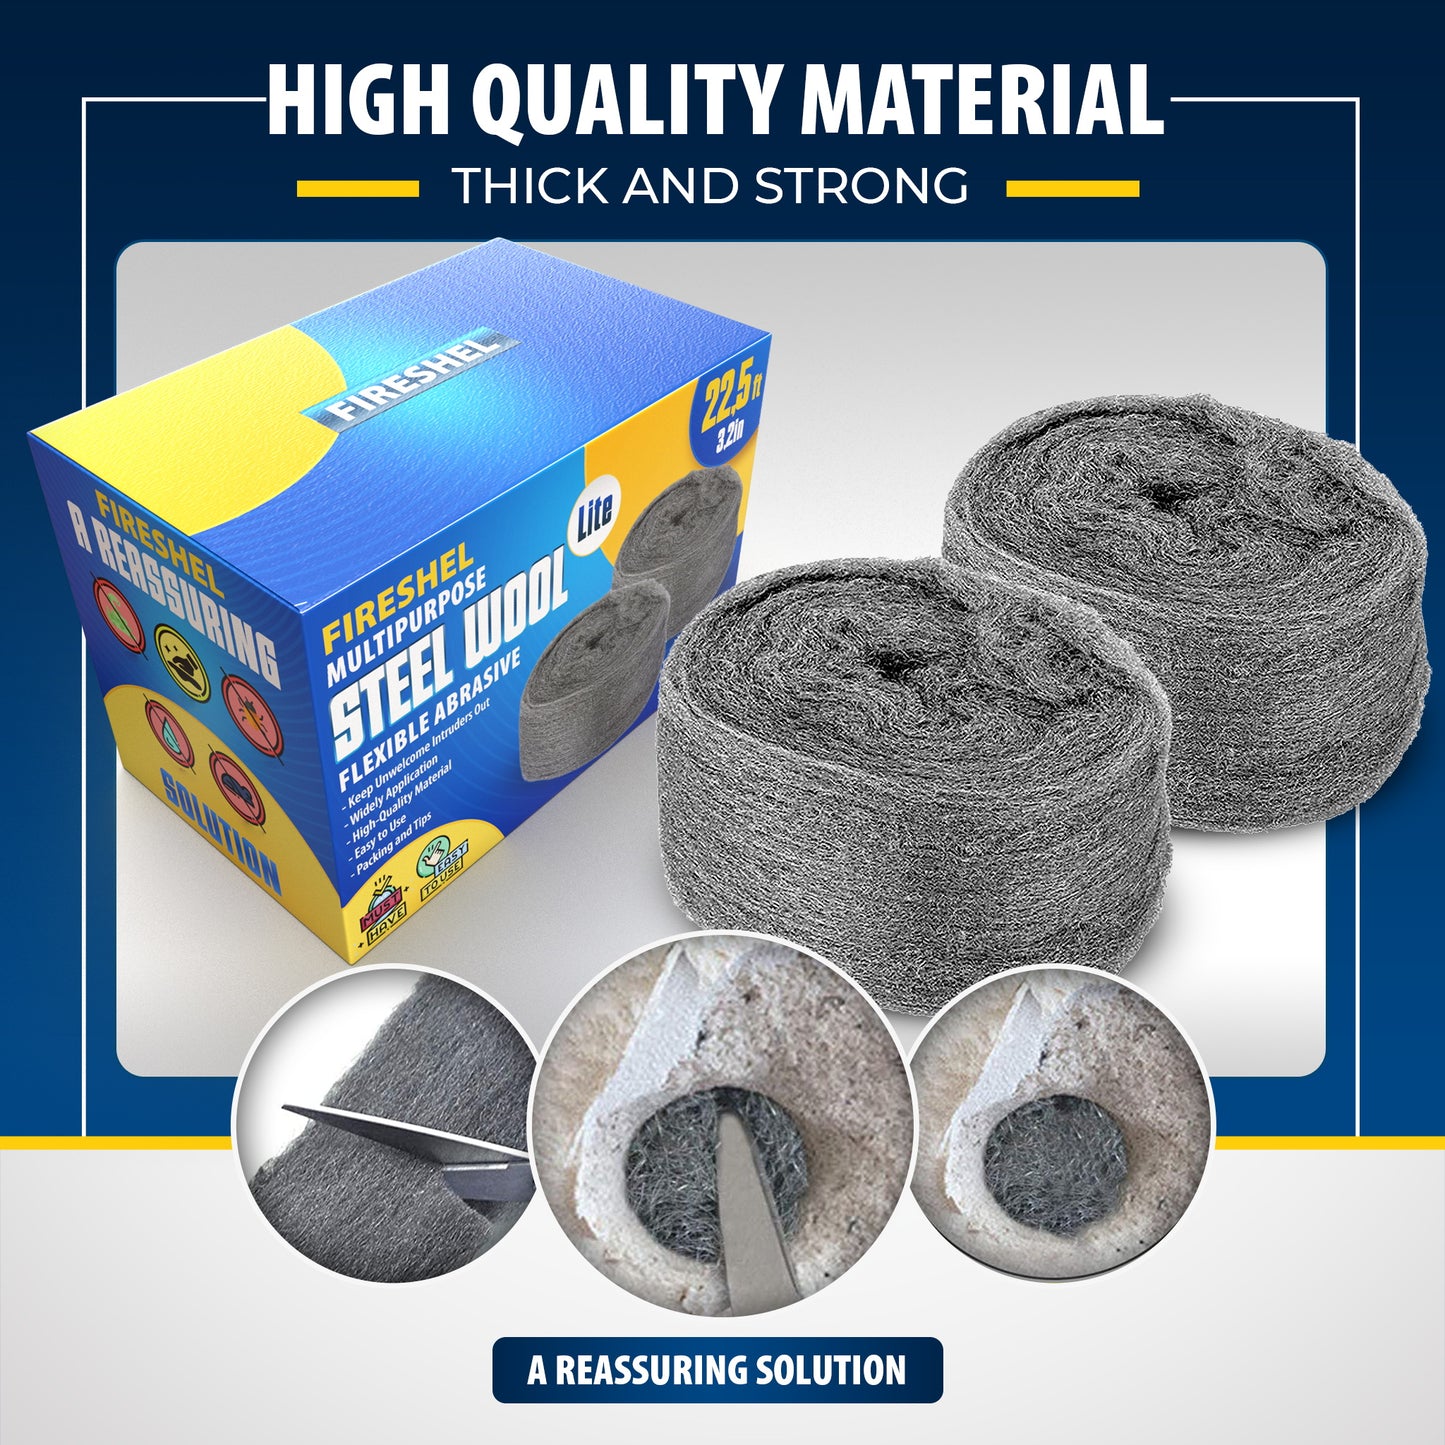 FIRESHEL Steel Wool, Gap Filter for House & Garage - Keep Mice Away from Holes, Siding, Pipeline, Vents in Garden, House